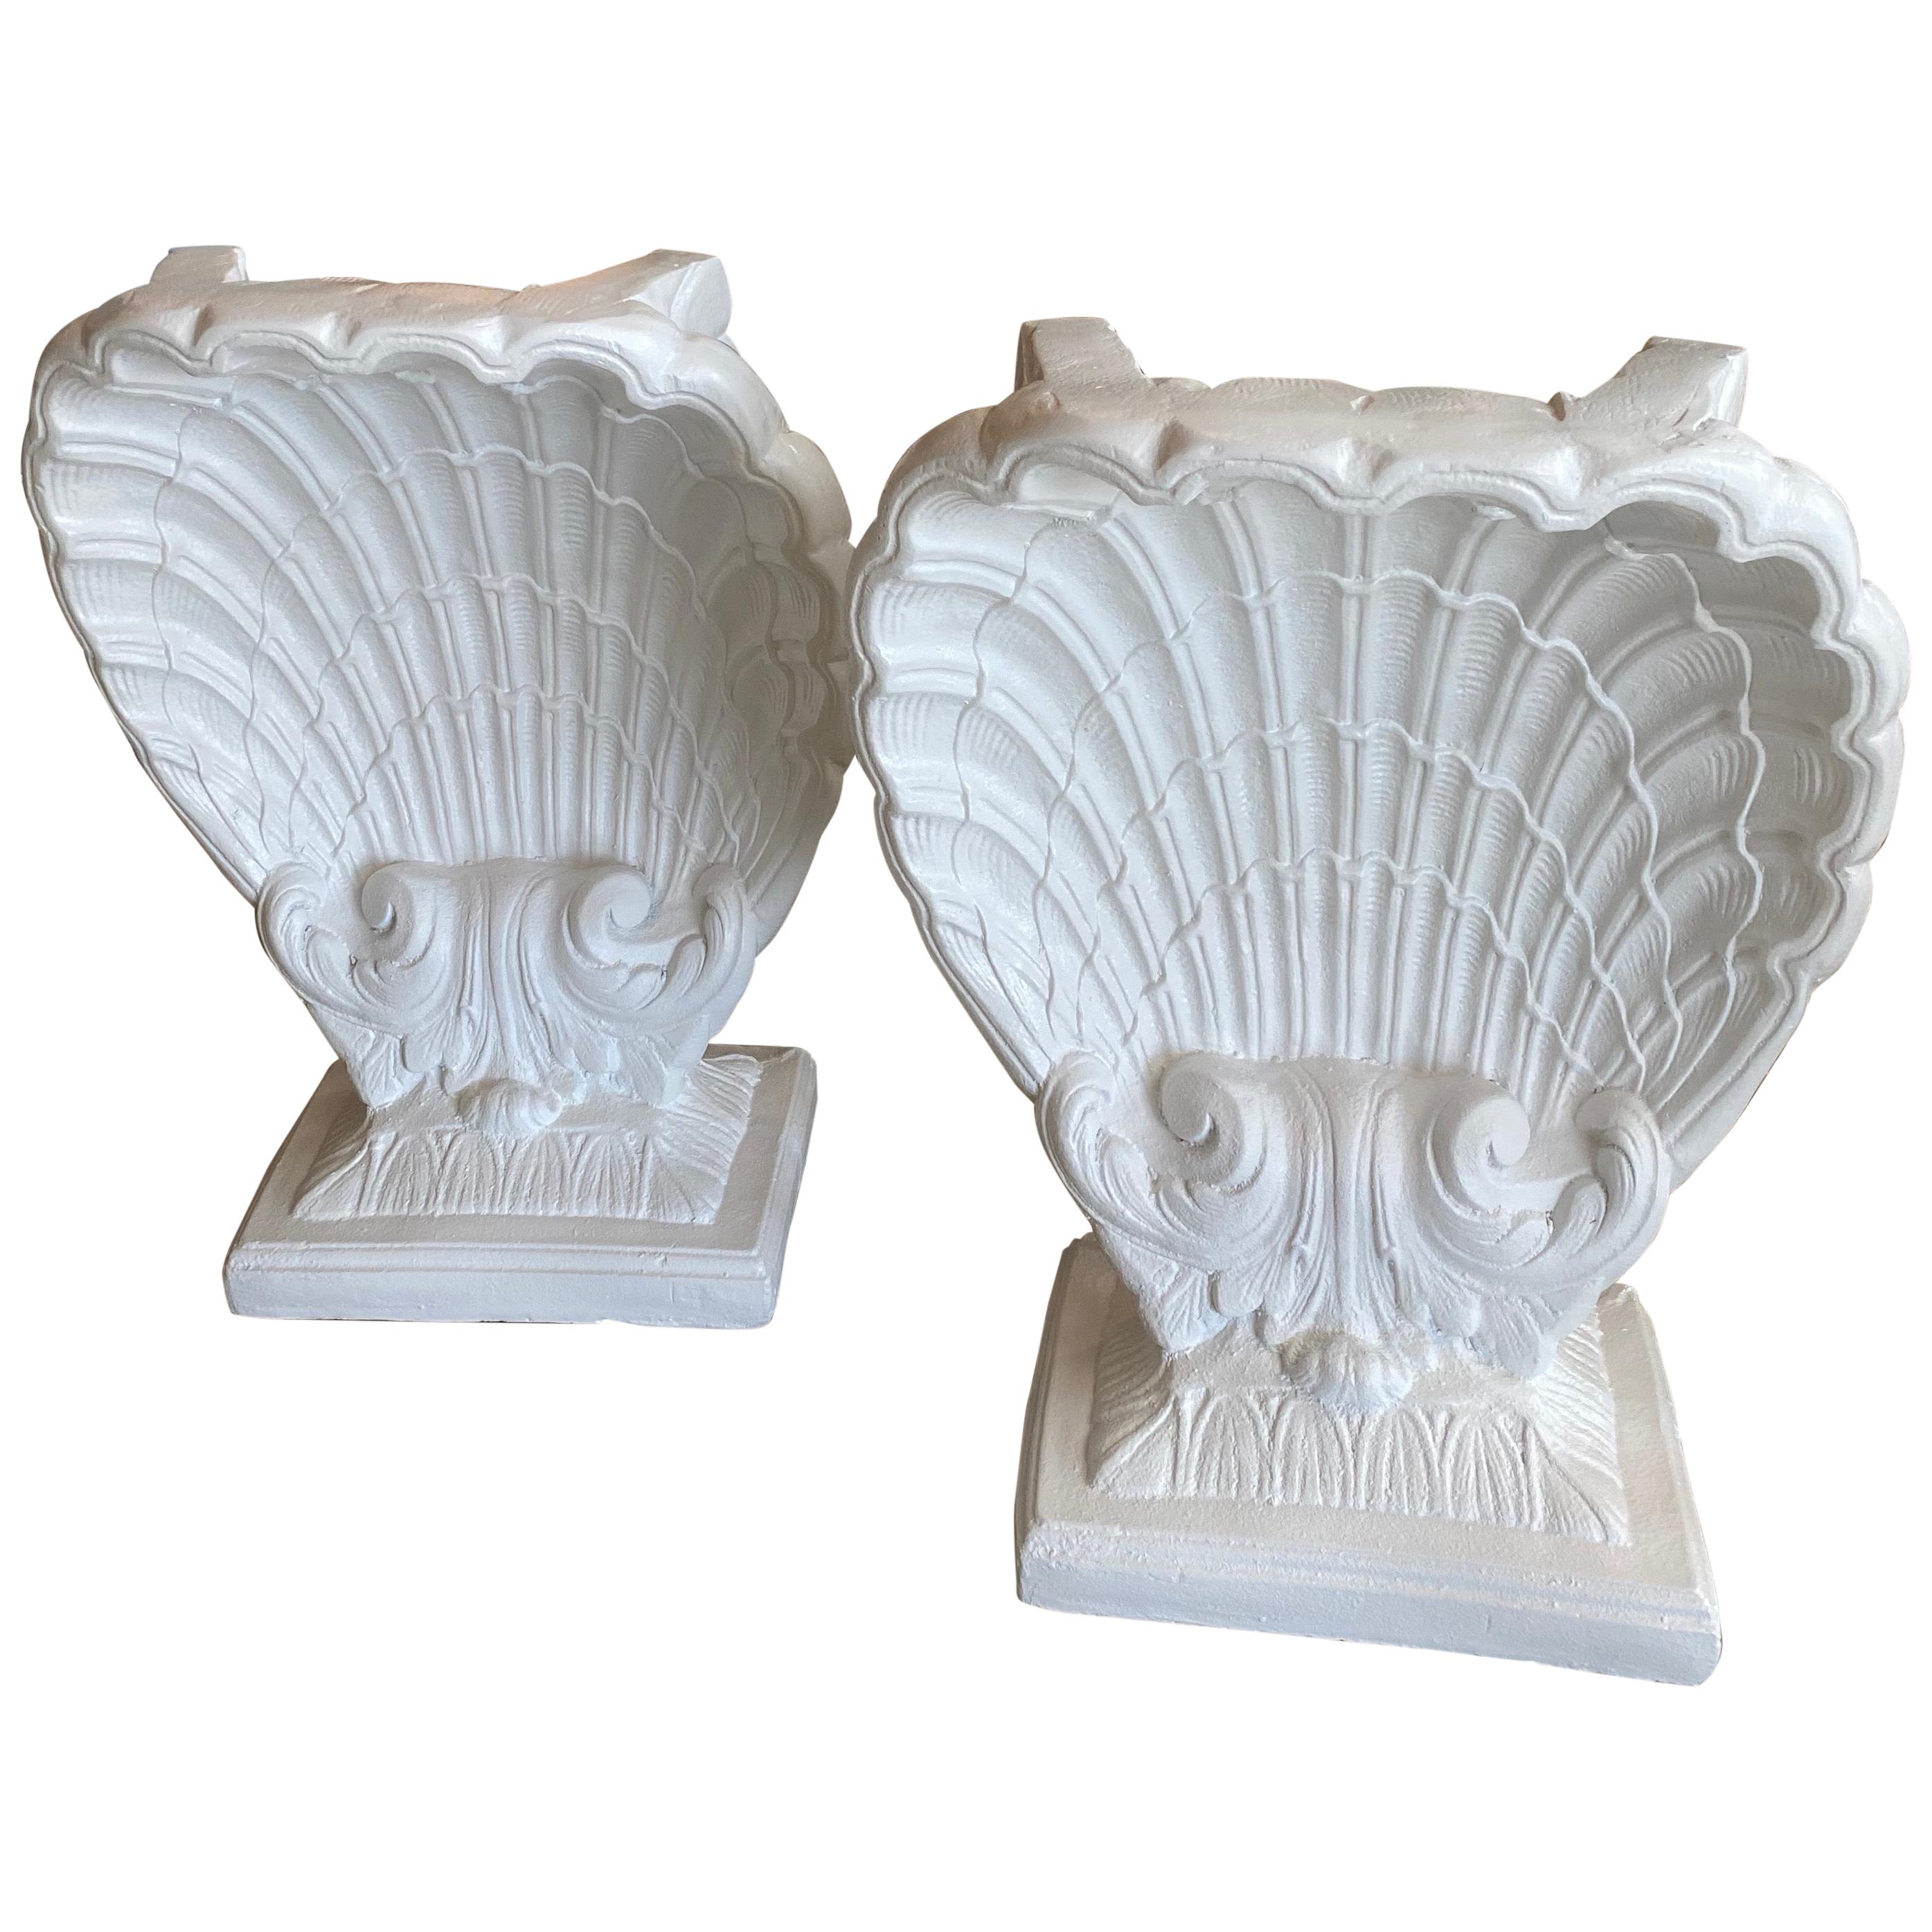 Vintage Pair of Plaster Seashell Scallop Shell Dining Table or Desk Bases